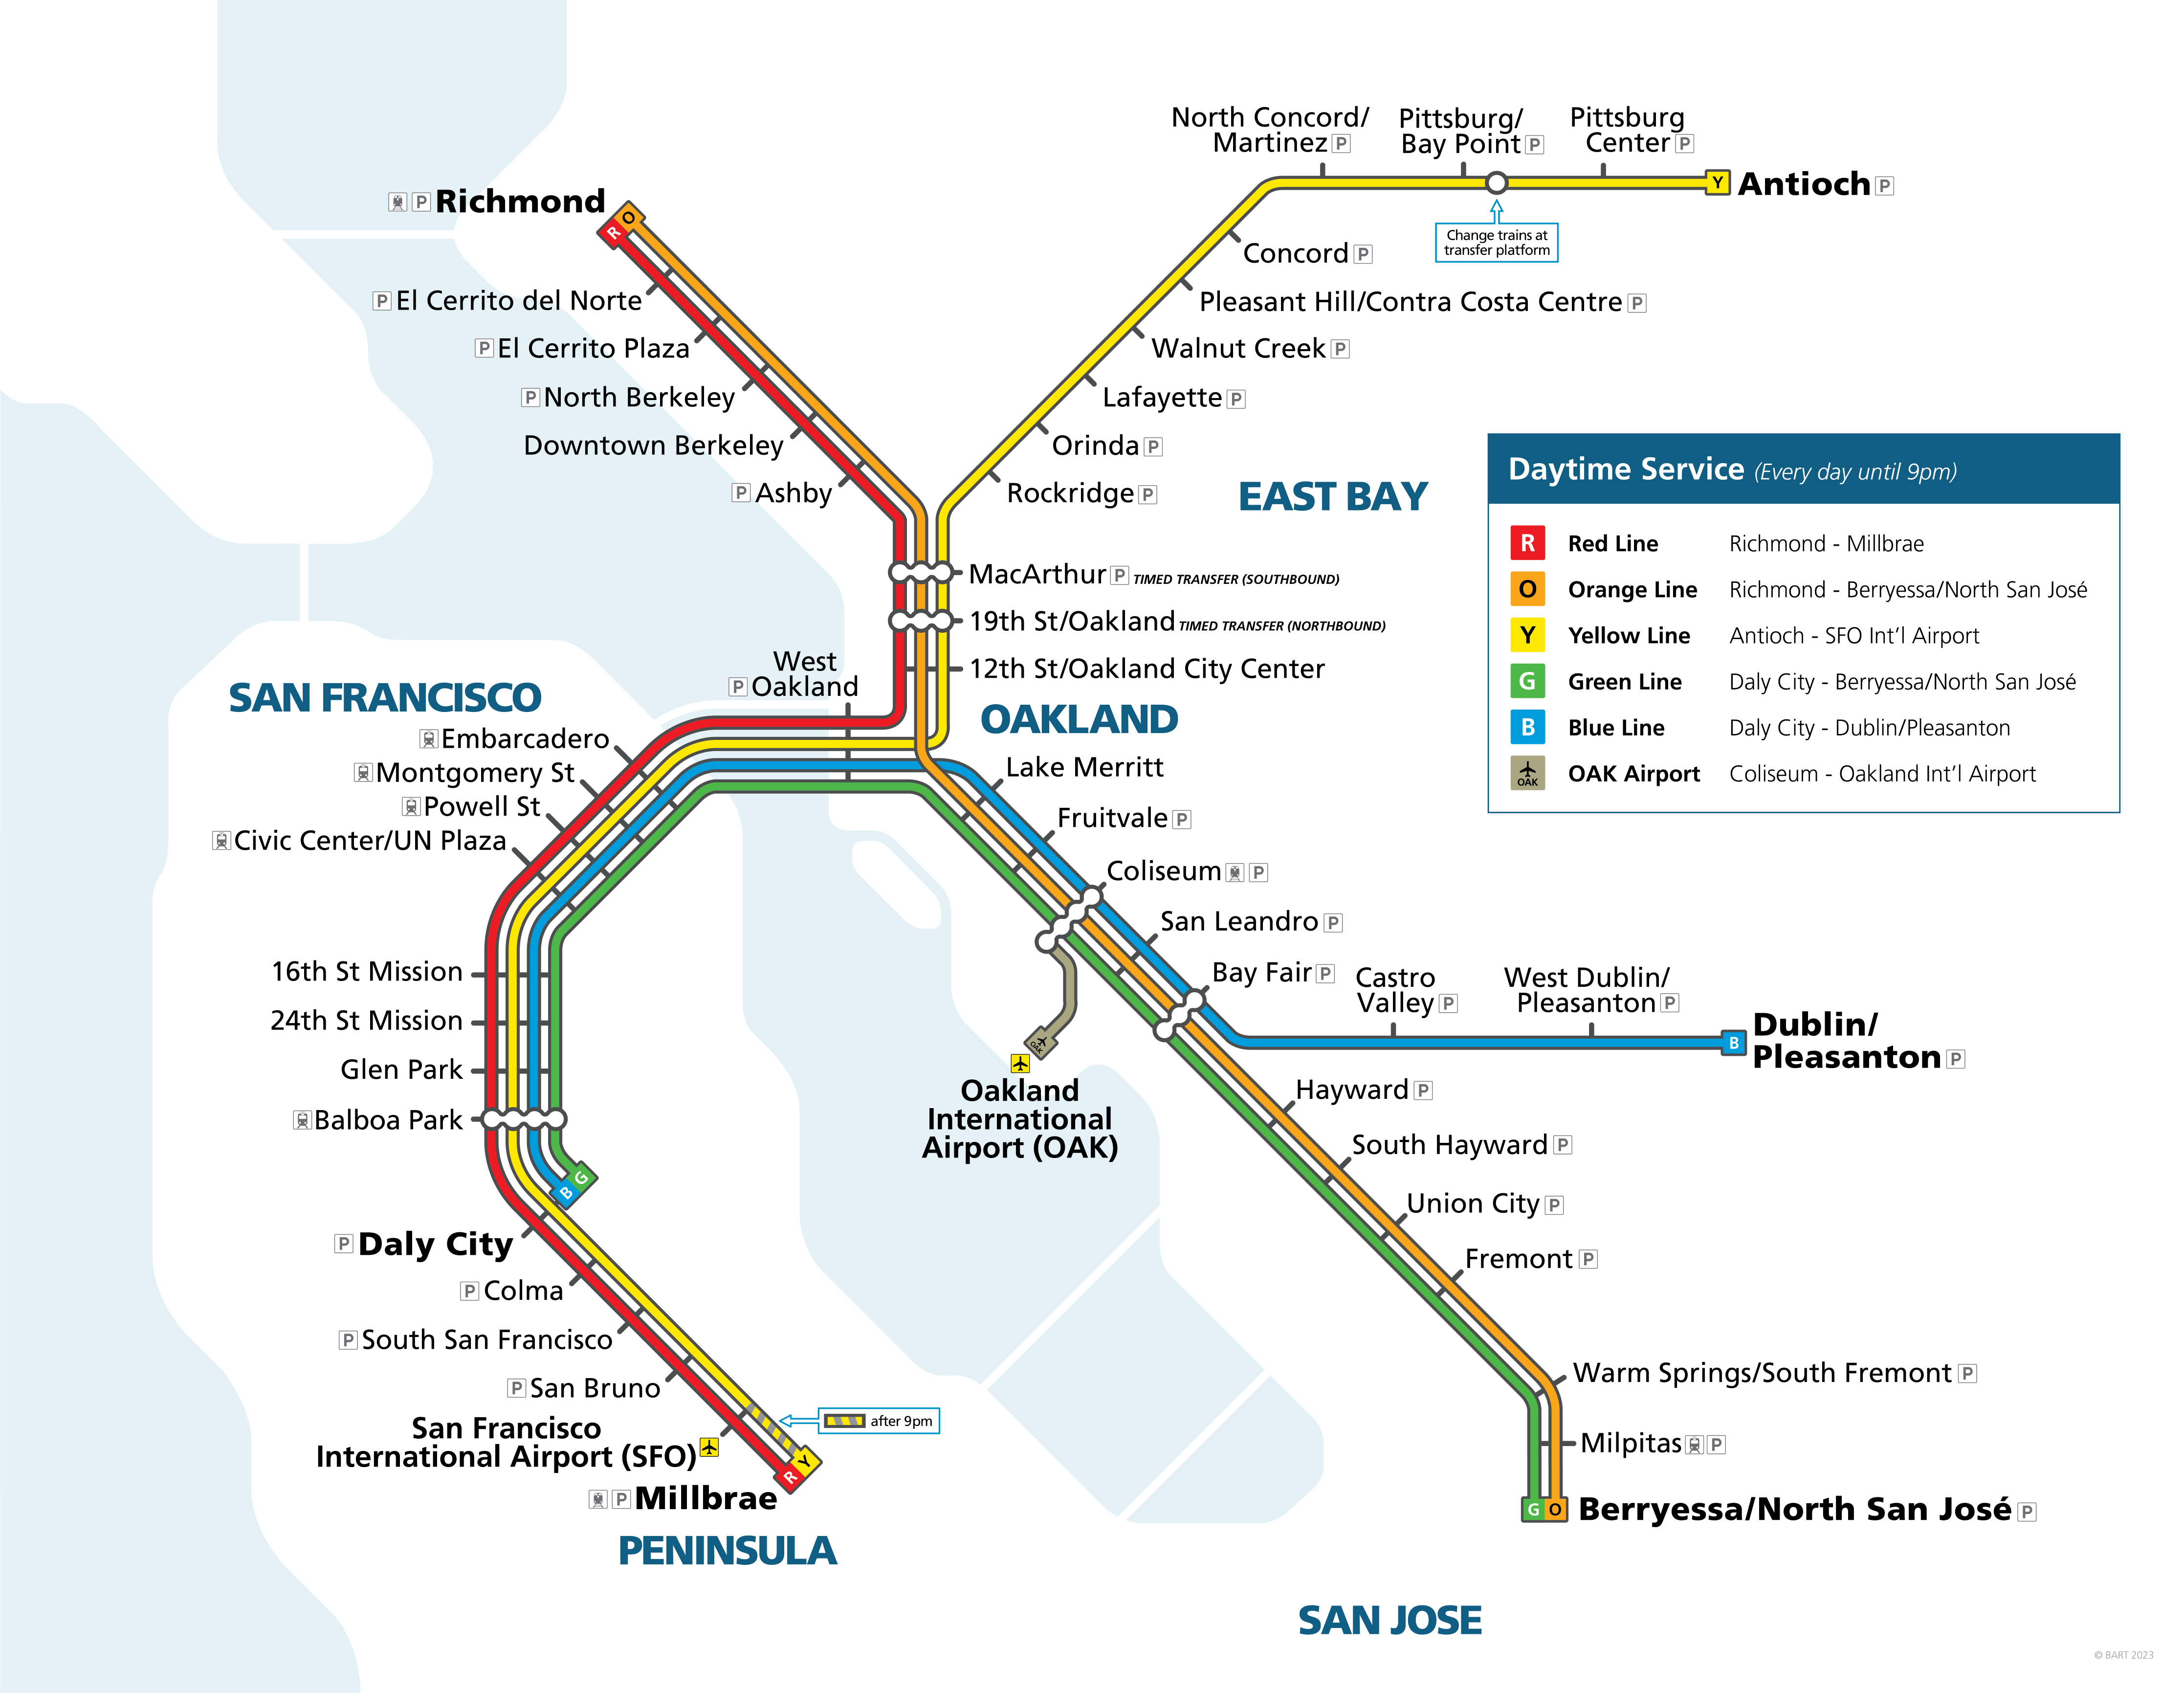 BART System Map